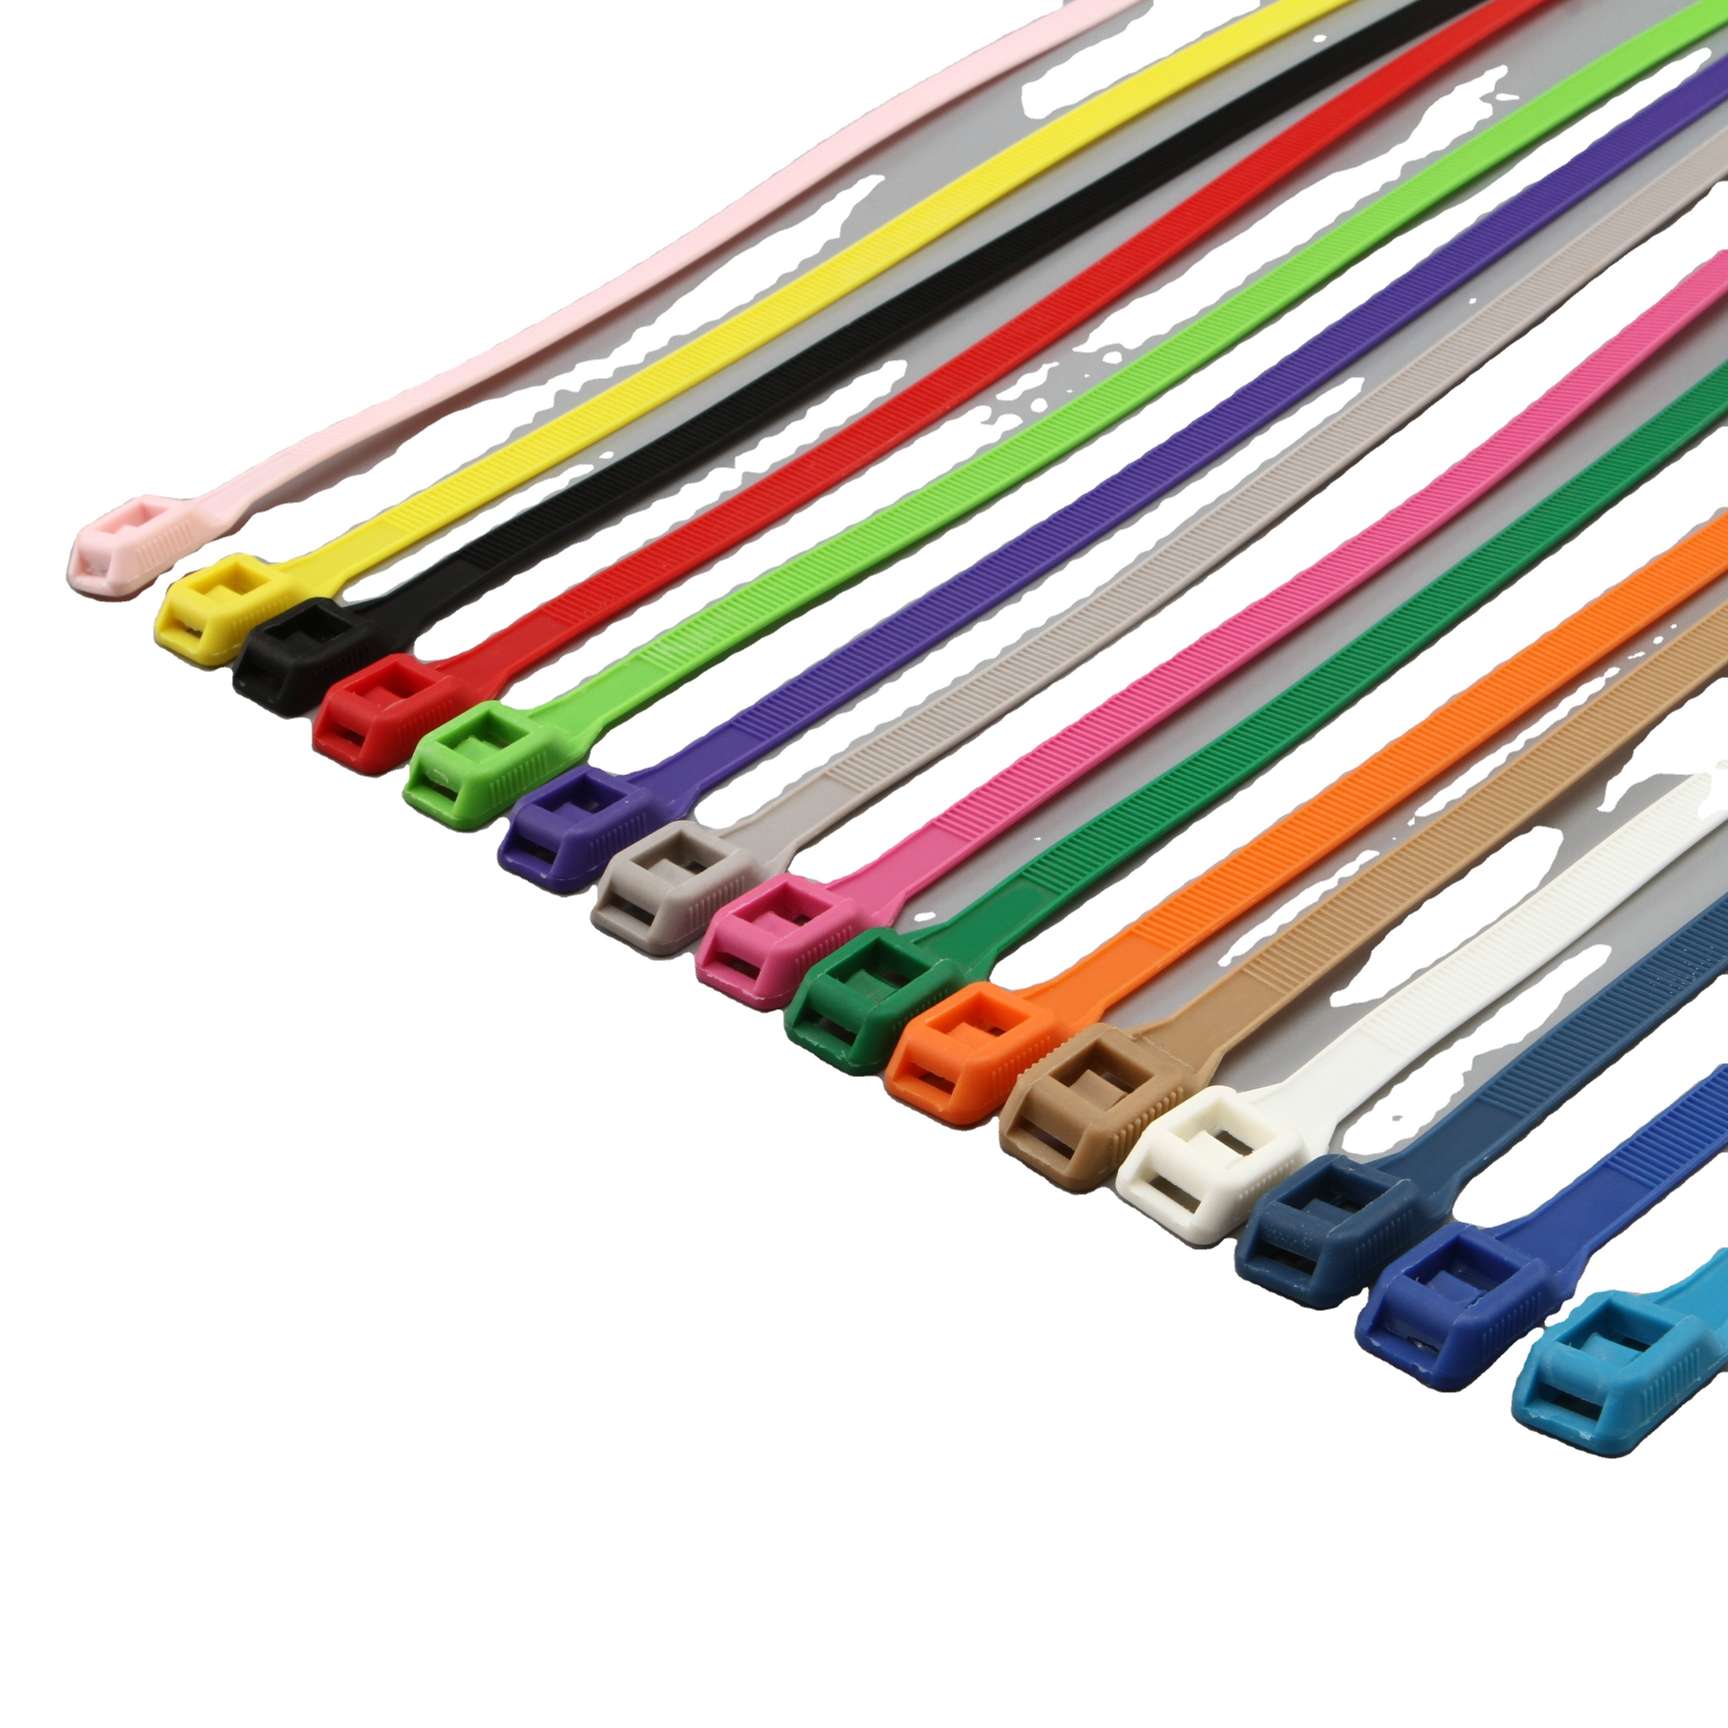 Tamper cable ties - 1 